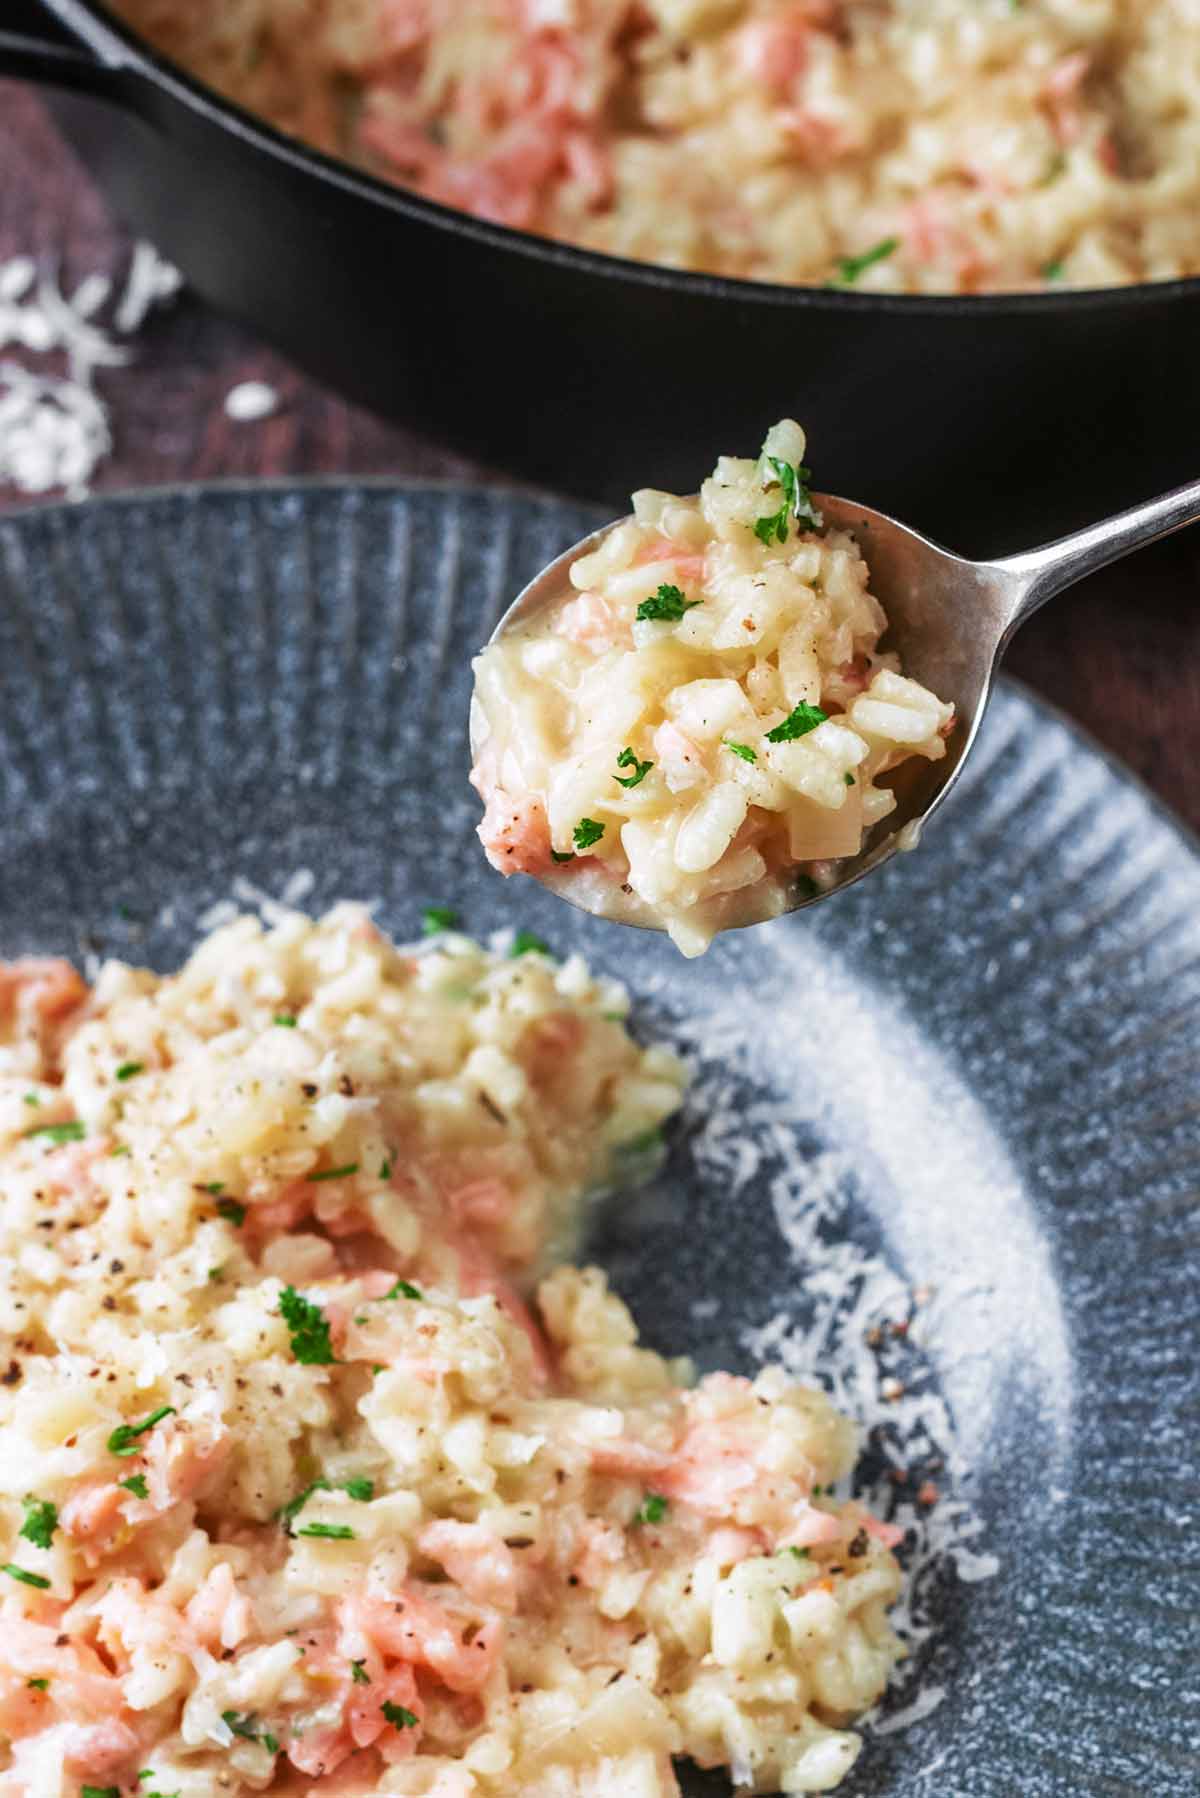 A spoon lifting some risotto from a bowl.